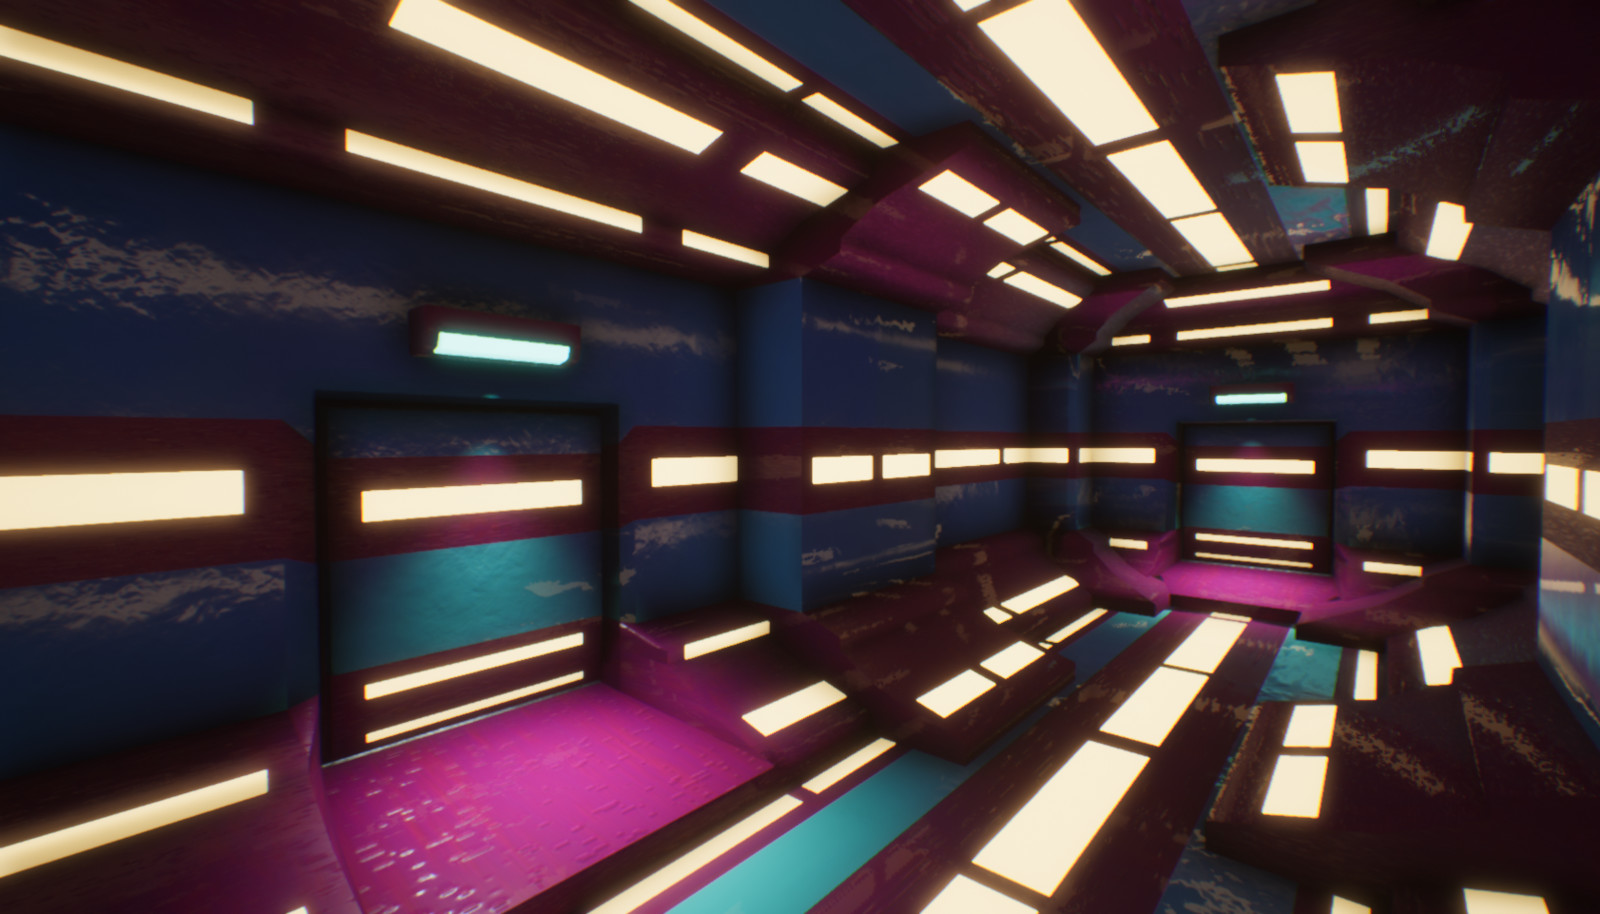 The screenshots of the final level are presented here. After some added effects and tweaks to the lighting and materials, the spaceship's halls finally started to look like they were booting up.